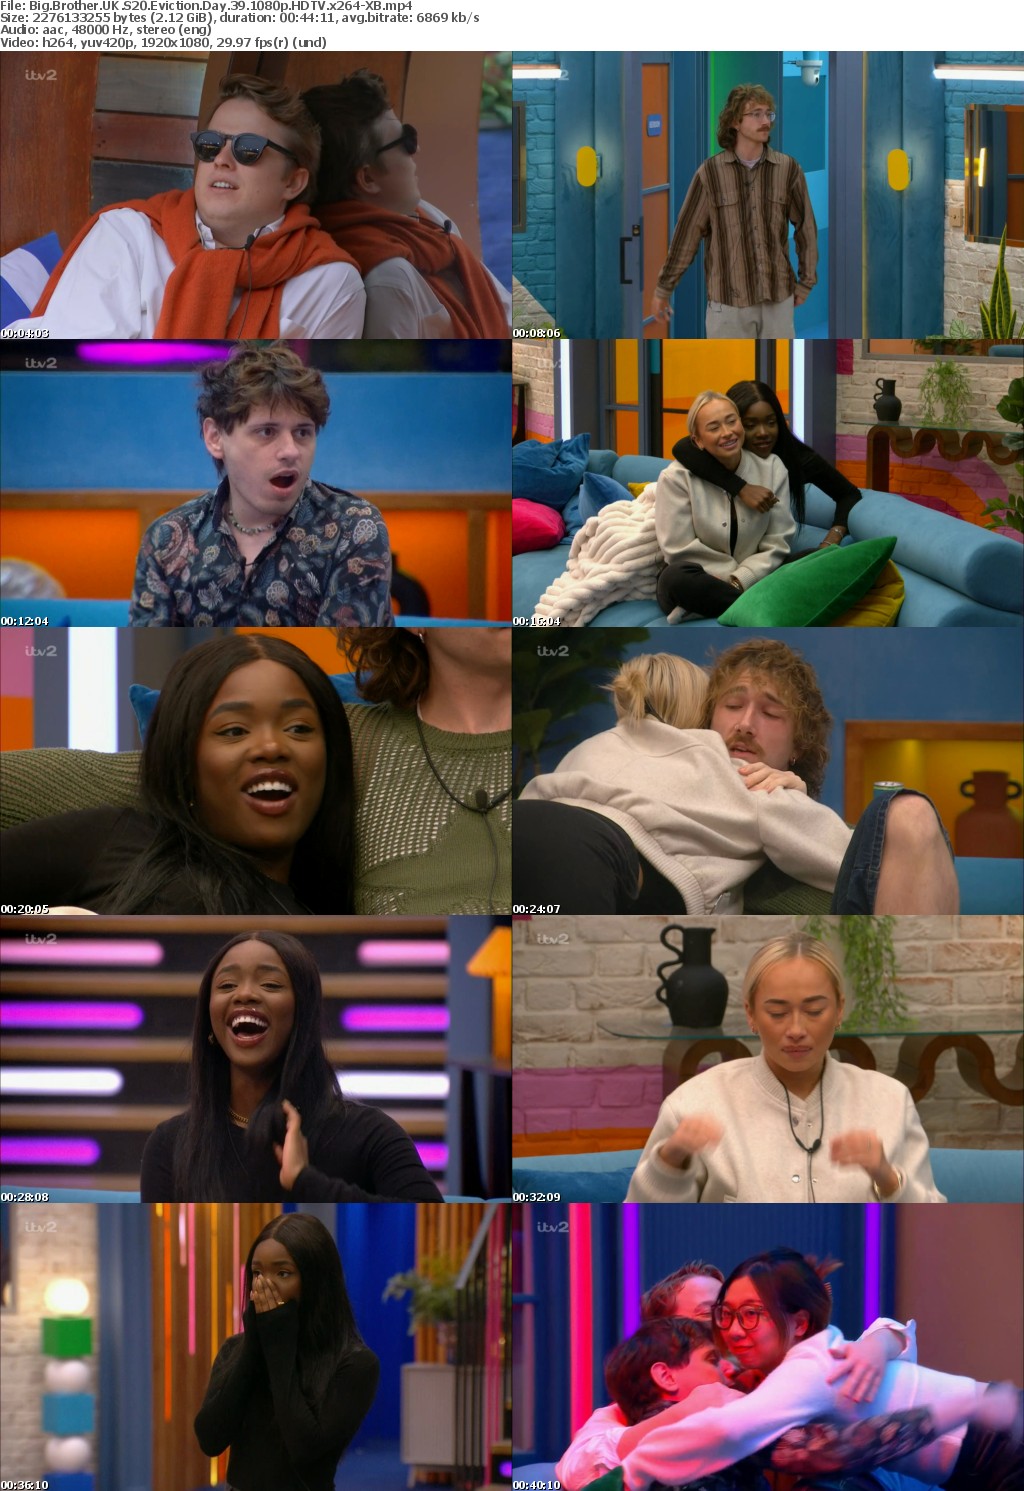 Big Brother UK S20 Eviction Day 39 1080p HDTV x264-XB